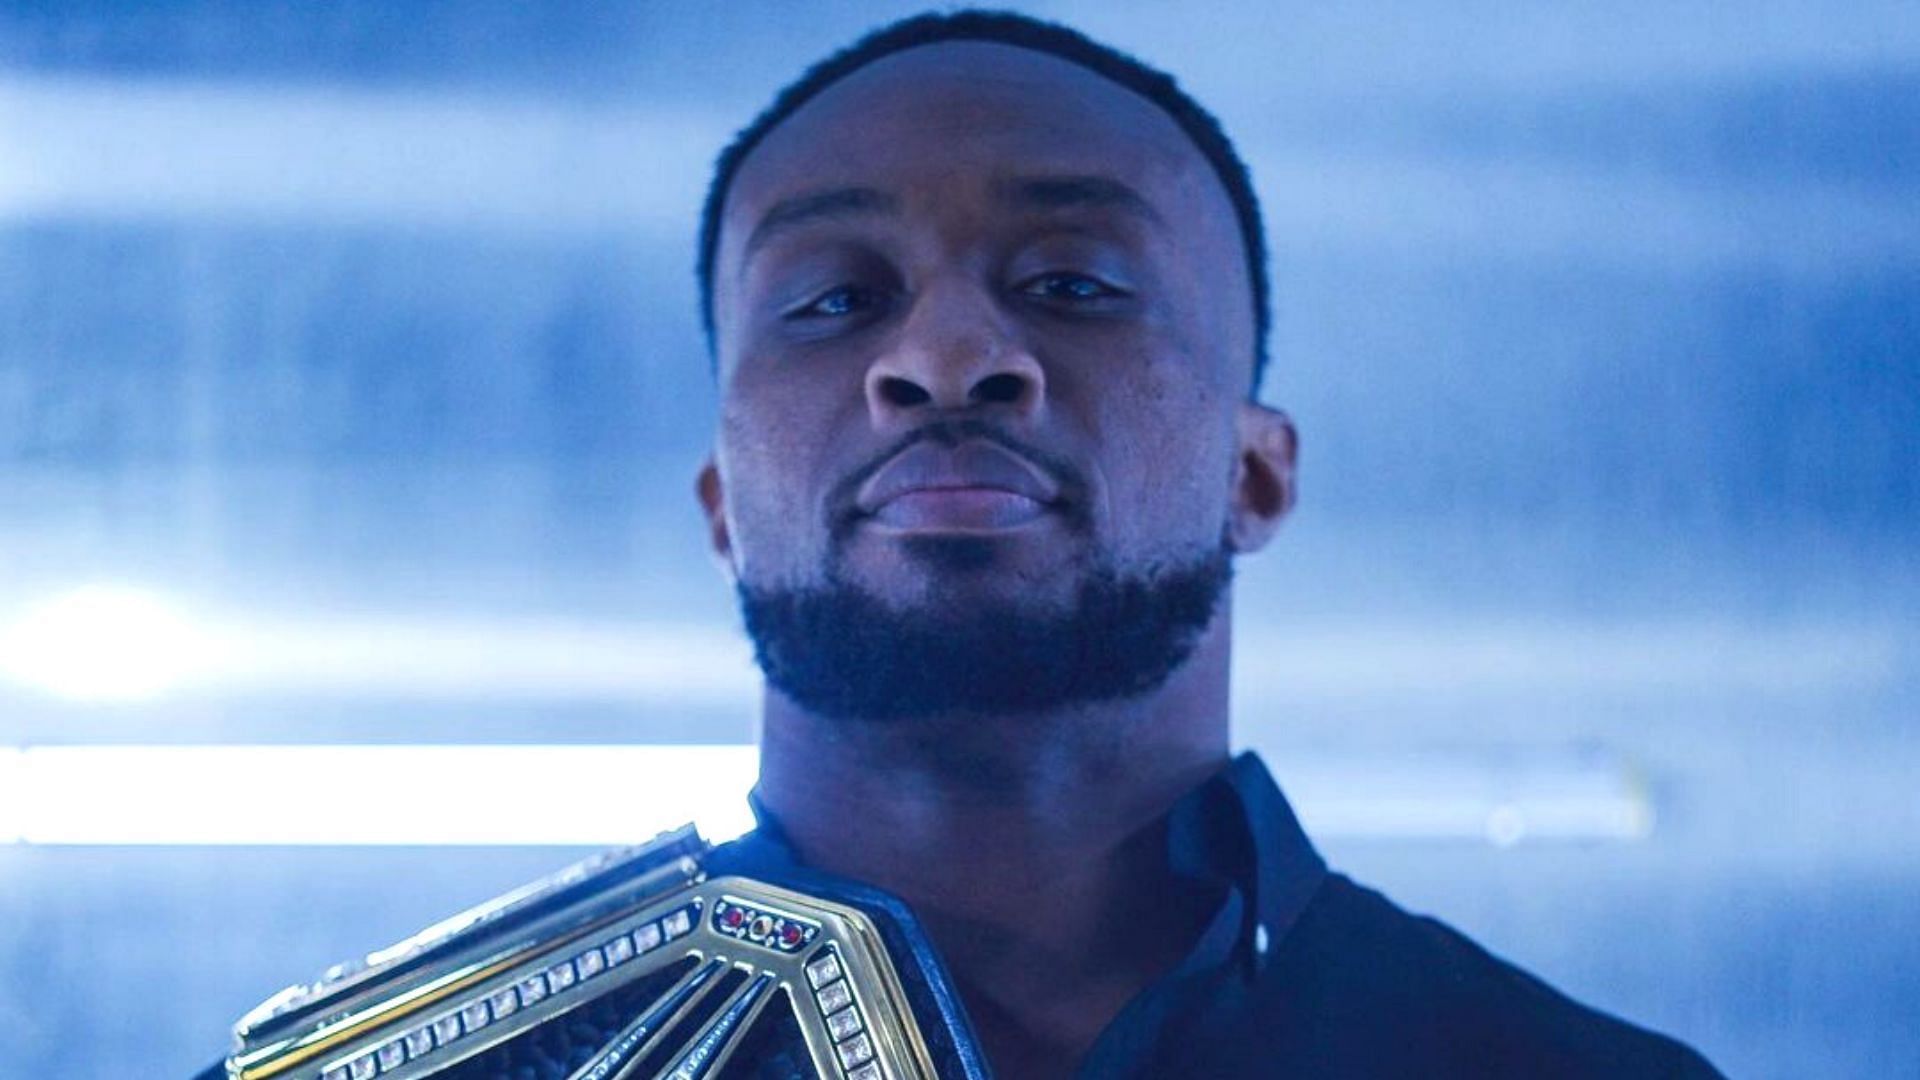 Big E is currently in his first reign as the WWE Champion.